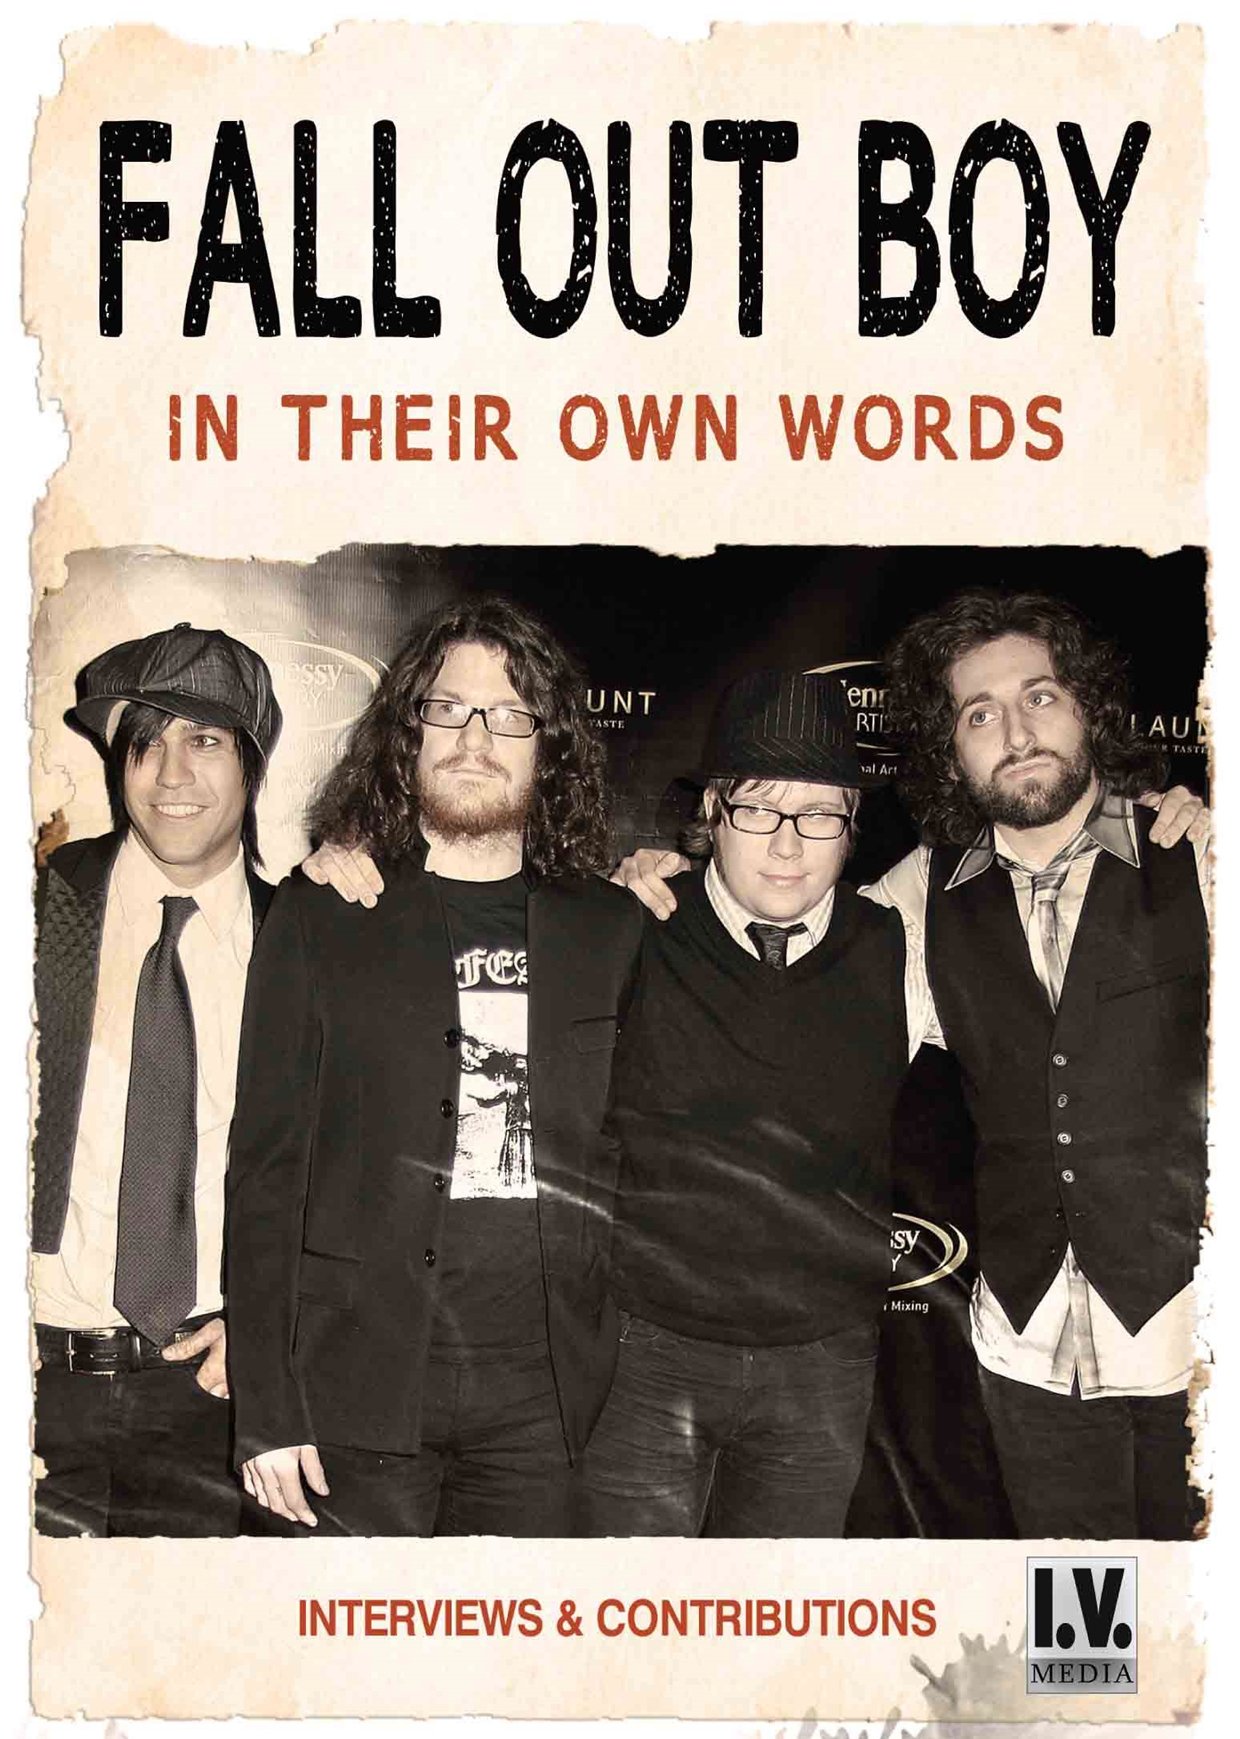 CD Shop - FALL OUT BOY IN THEIR OWN WORDS